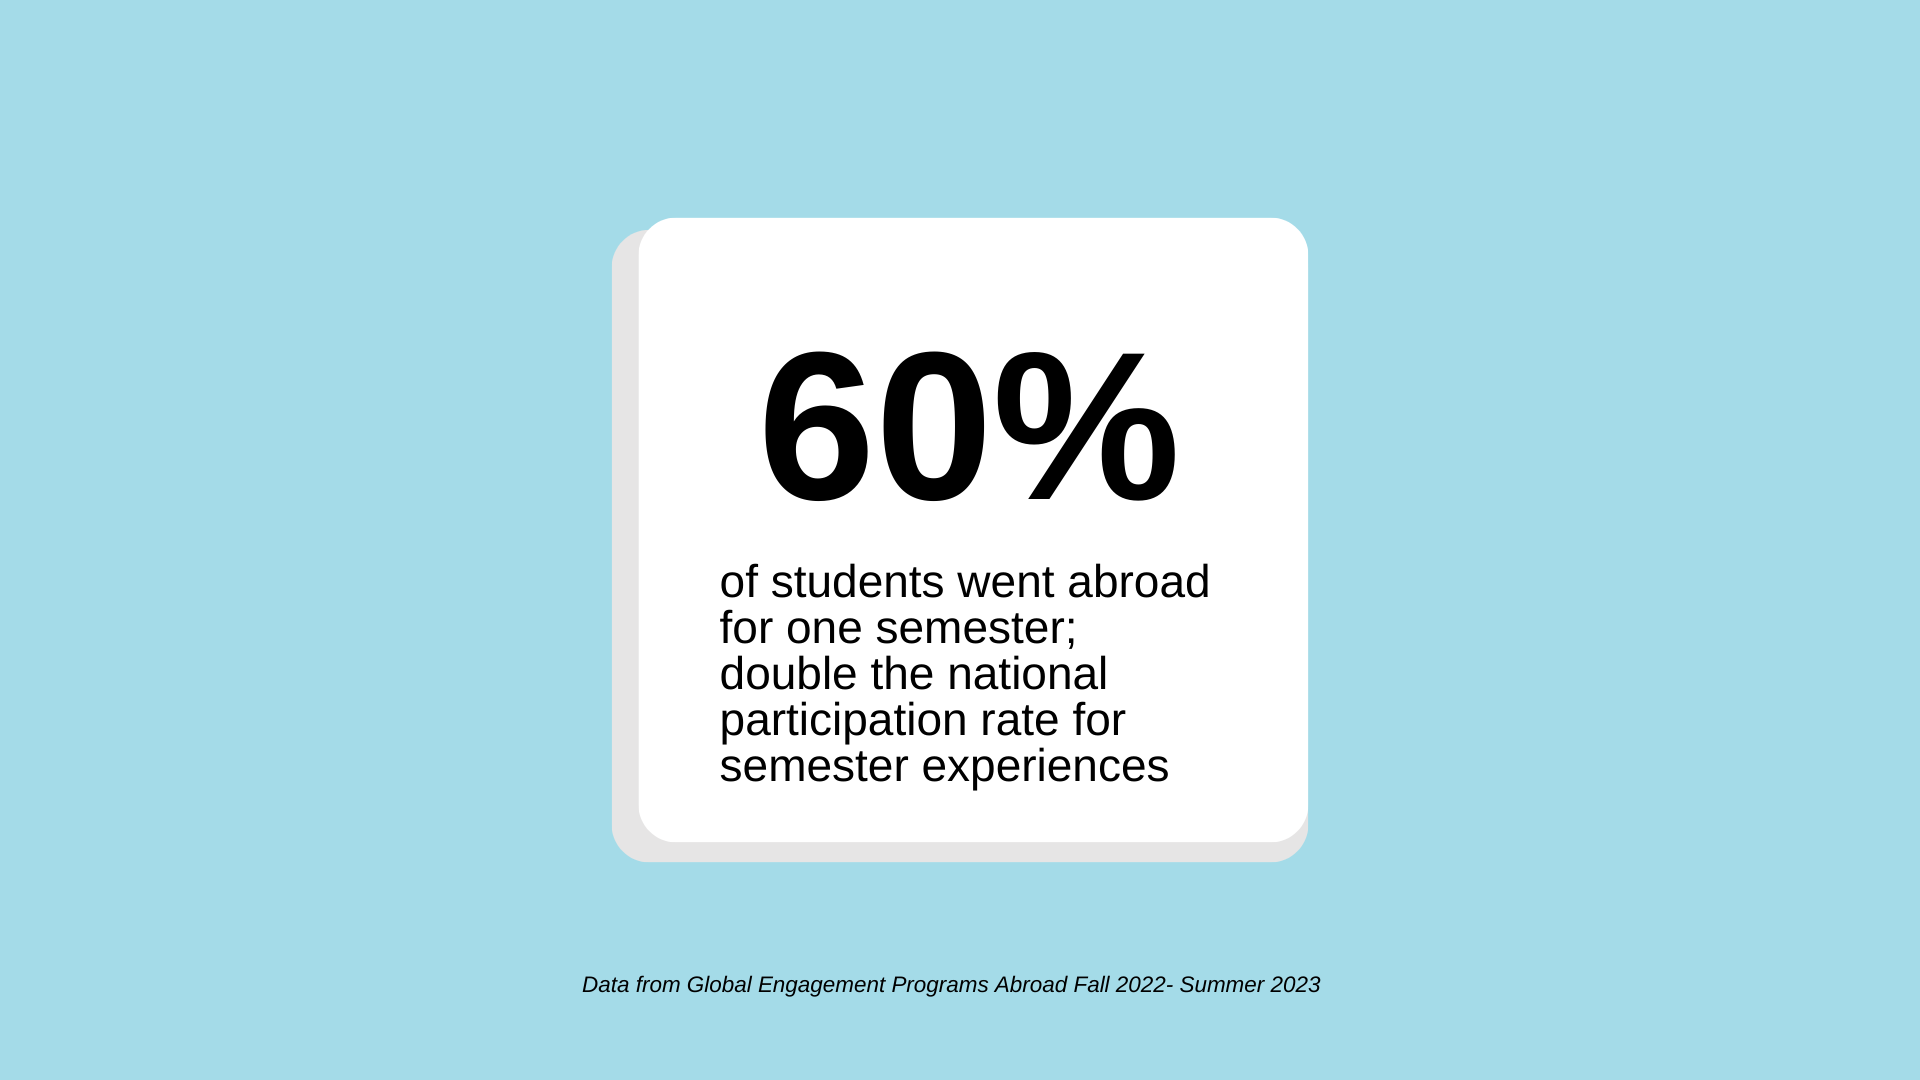 60% of students went abroad for one semester; double the national participation rate for semester experiences; data from Data from Global Engagement Programs Abroad Fall 2022- Summer 2023